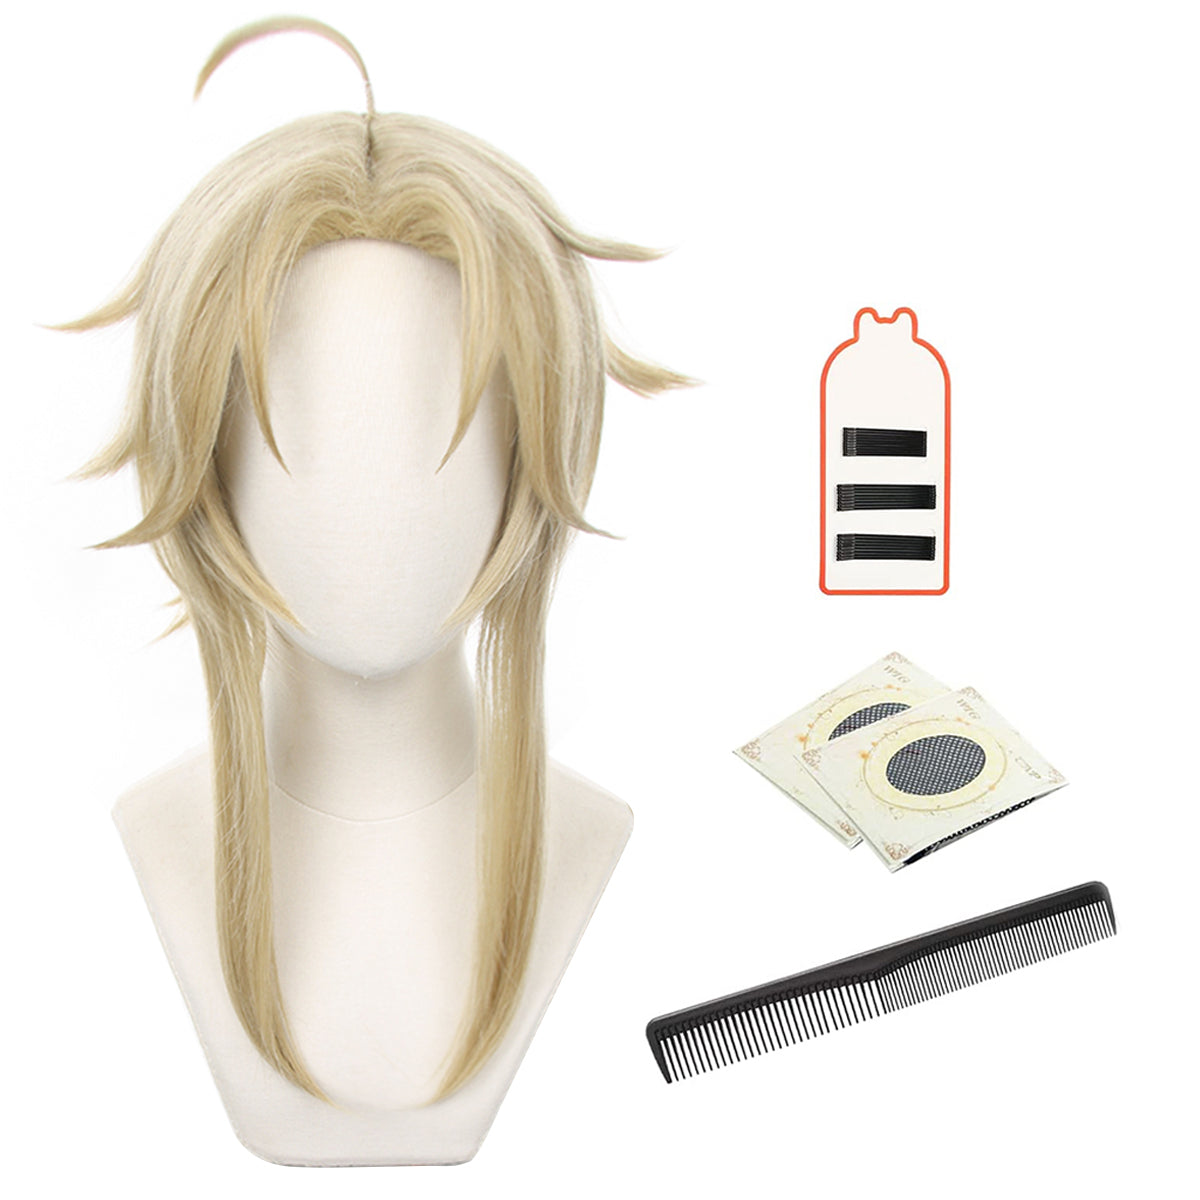 HOLOUN Honkai Star Rail Game Yanqing Cosplay Wig Rose Net Heat Resistant Synthetic Fiber Comb Hairpin Adjustable Halloween Party